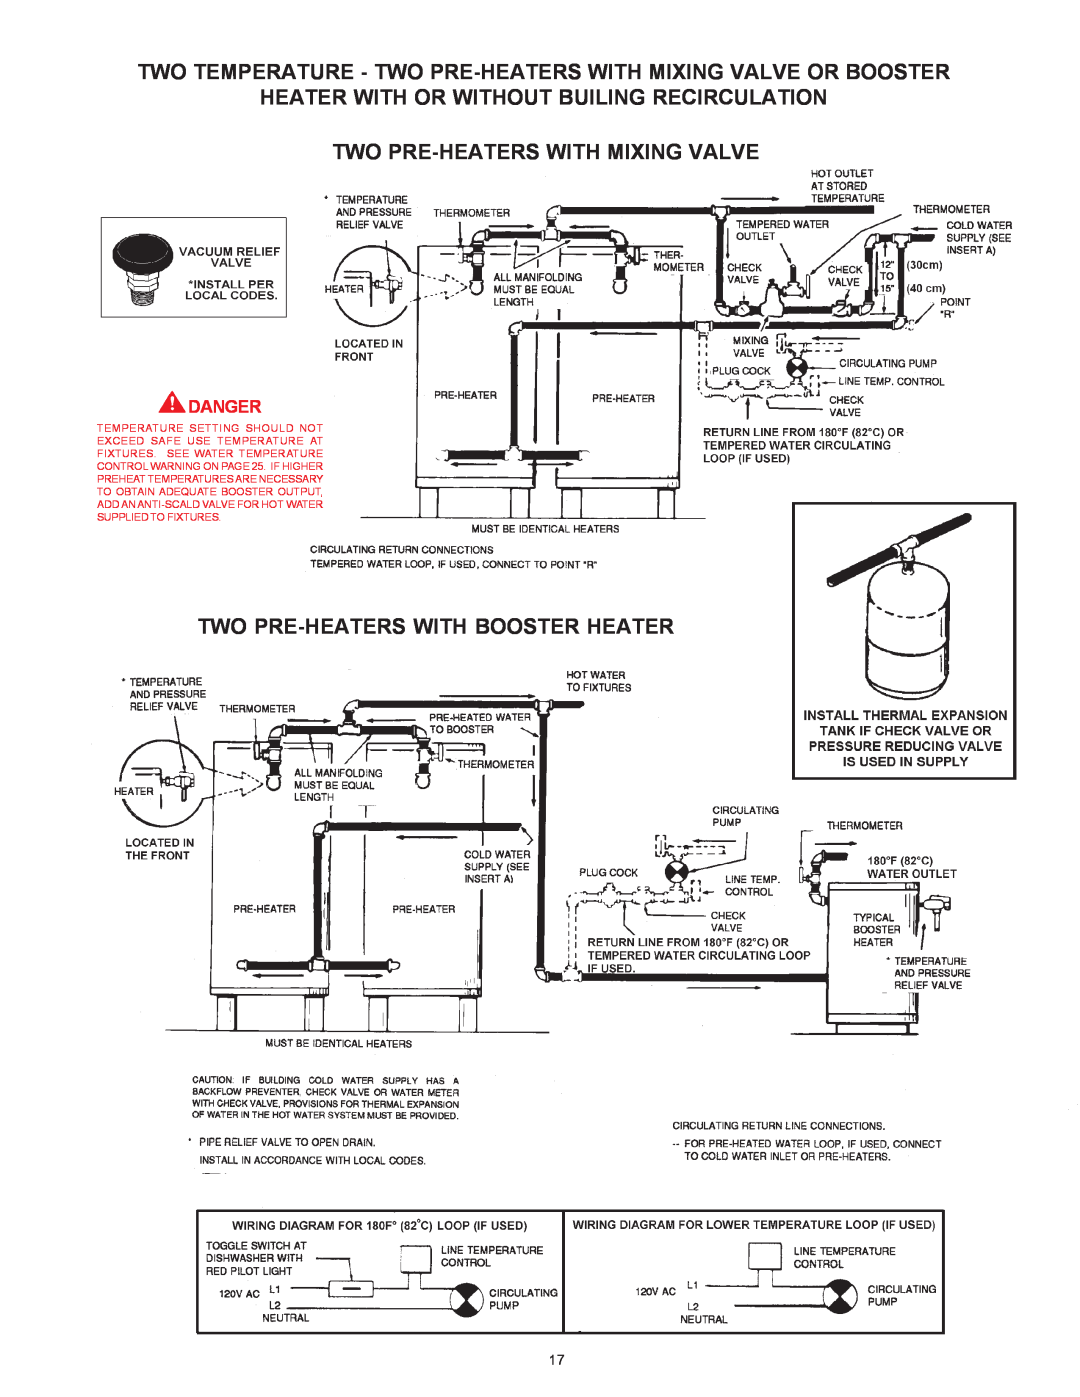 A.O. Smith BTN 120 THRU 400/A Series warranty Two Temperature - Two Pre-Heaters With Mixing Valve Or Booster, Danger 